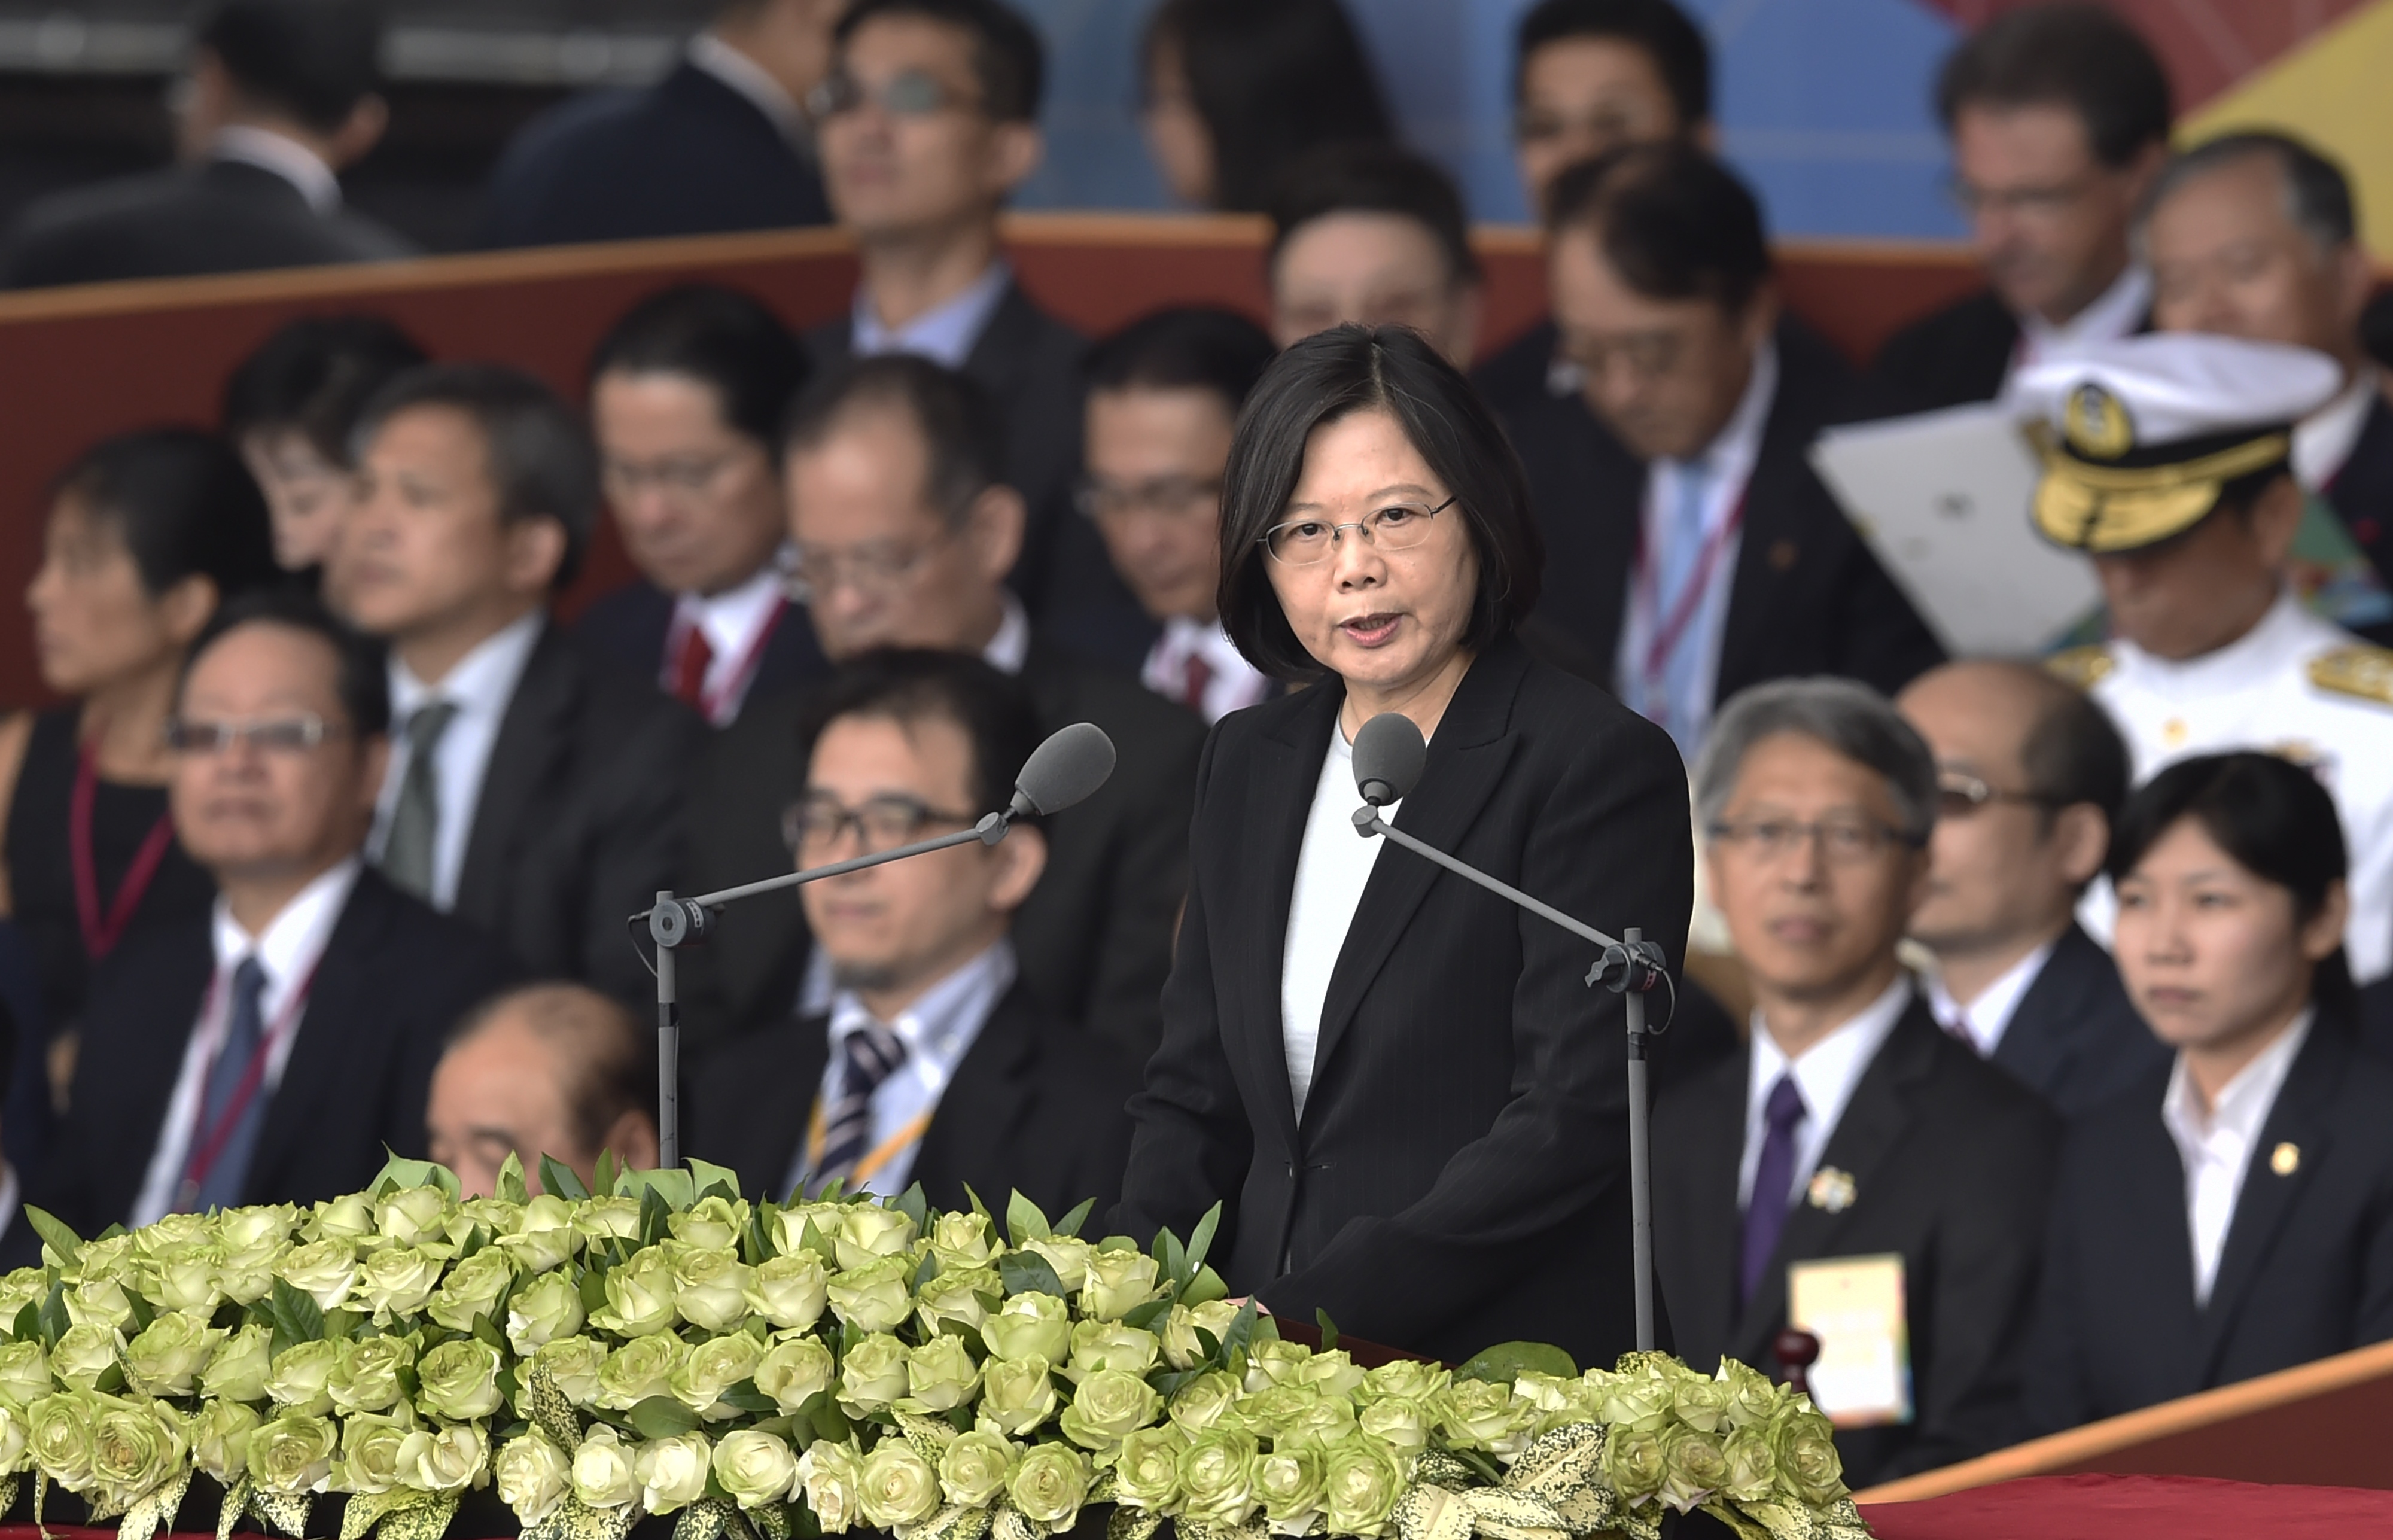 Taiwan President Tsai Ing-wen speaks during National Day celebrations in front of the Presidential Palace in Taipei on October 10, 2016.   Taiwanese President Tsai Ing-wen on October 10 called for a resumption of talks with China and pledged that "anything" can be on the table for discussion. Relations with Beijing have deteriorated under Taiwan's first female president, whose China-sceptic Democratic Progressive Party (DPP) took office in May after a landslide victory over the Kuomintang party (KMT).  / AFP PHOTO / SAM YEH